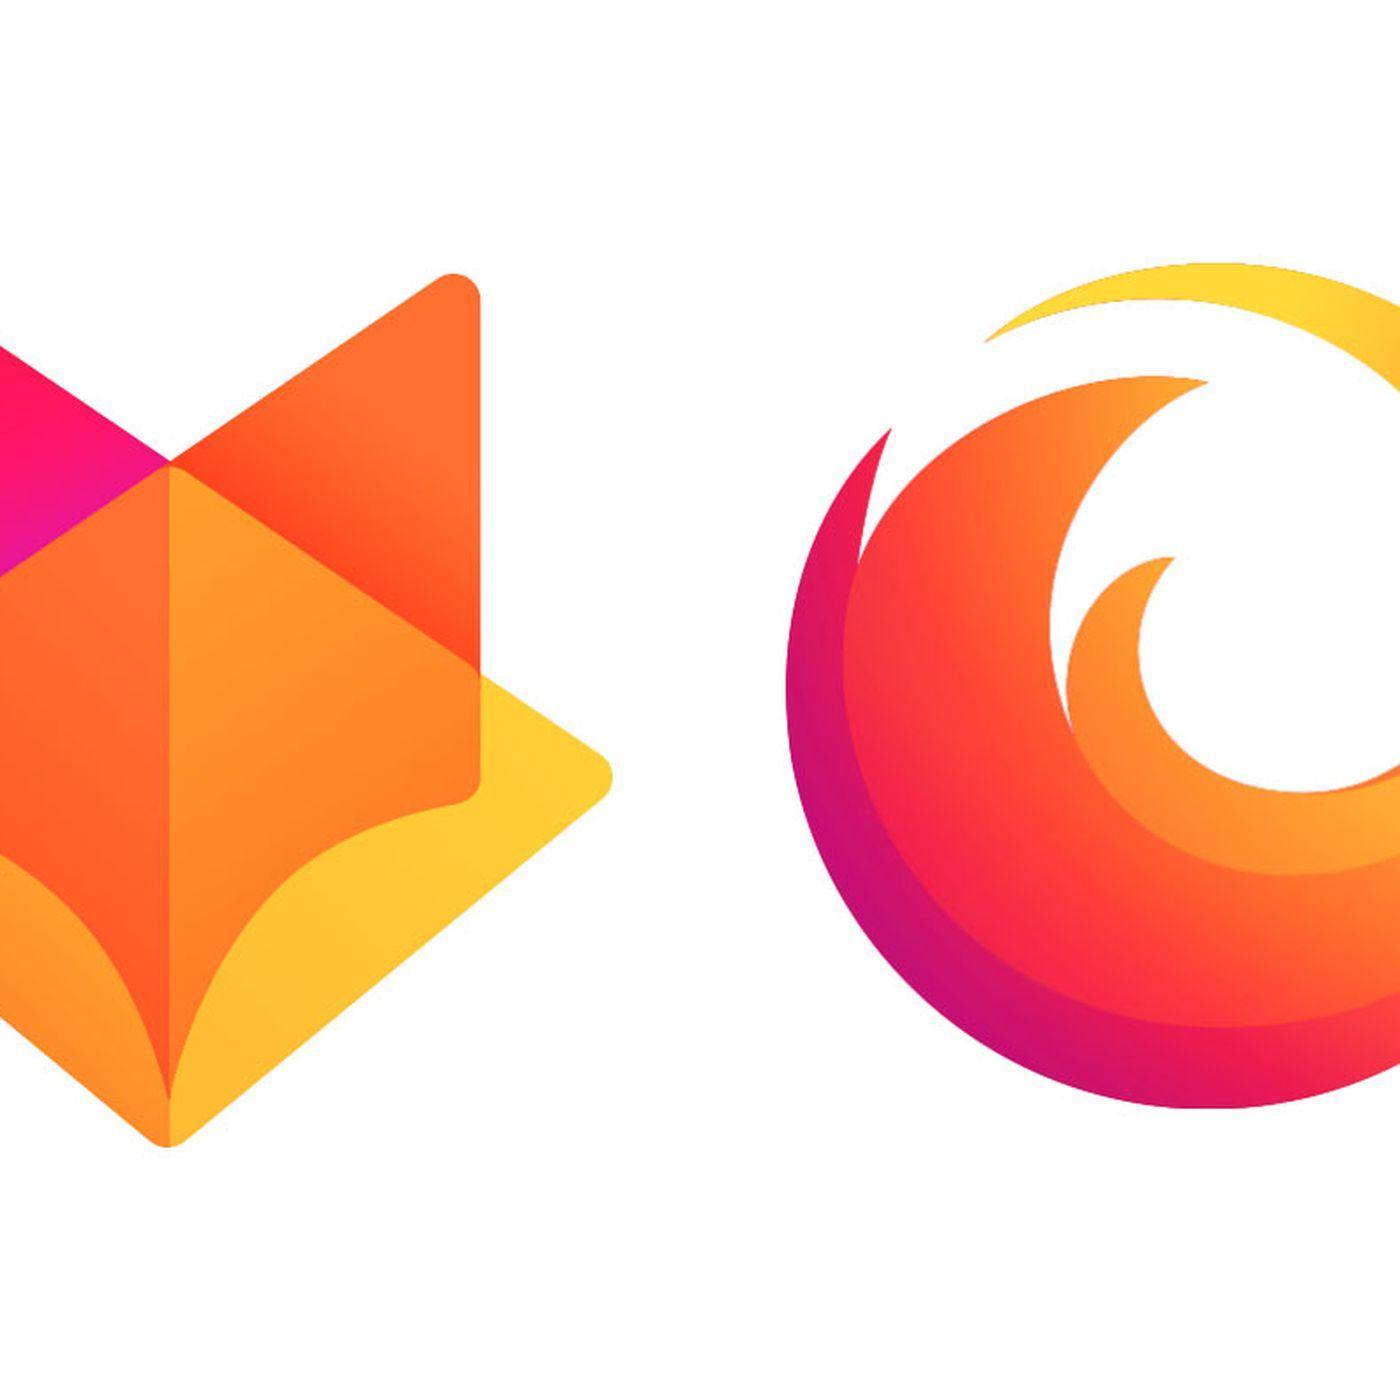 Symbol Logo - Firefox is getting a new logo, and Mozilla wants to hear what users